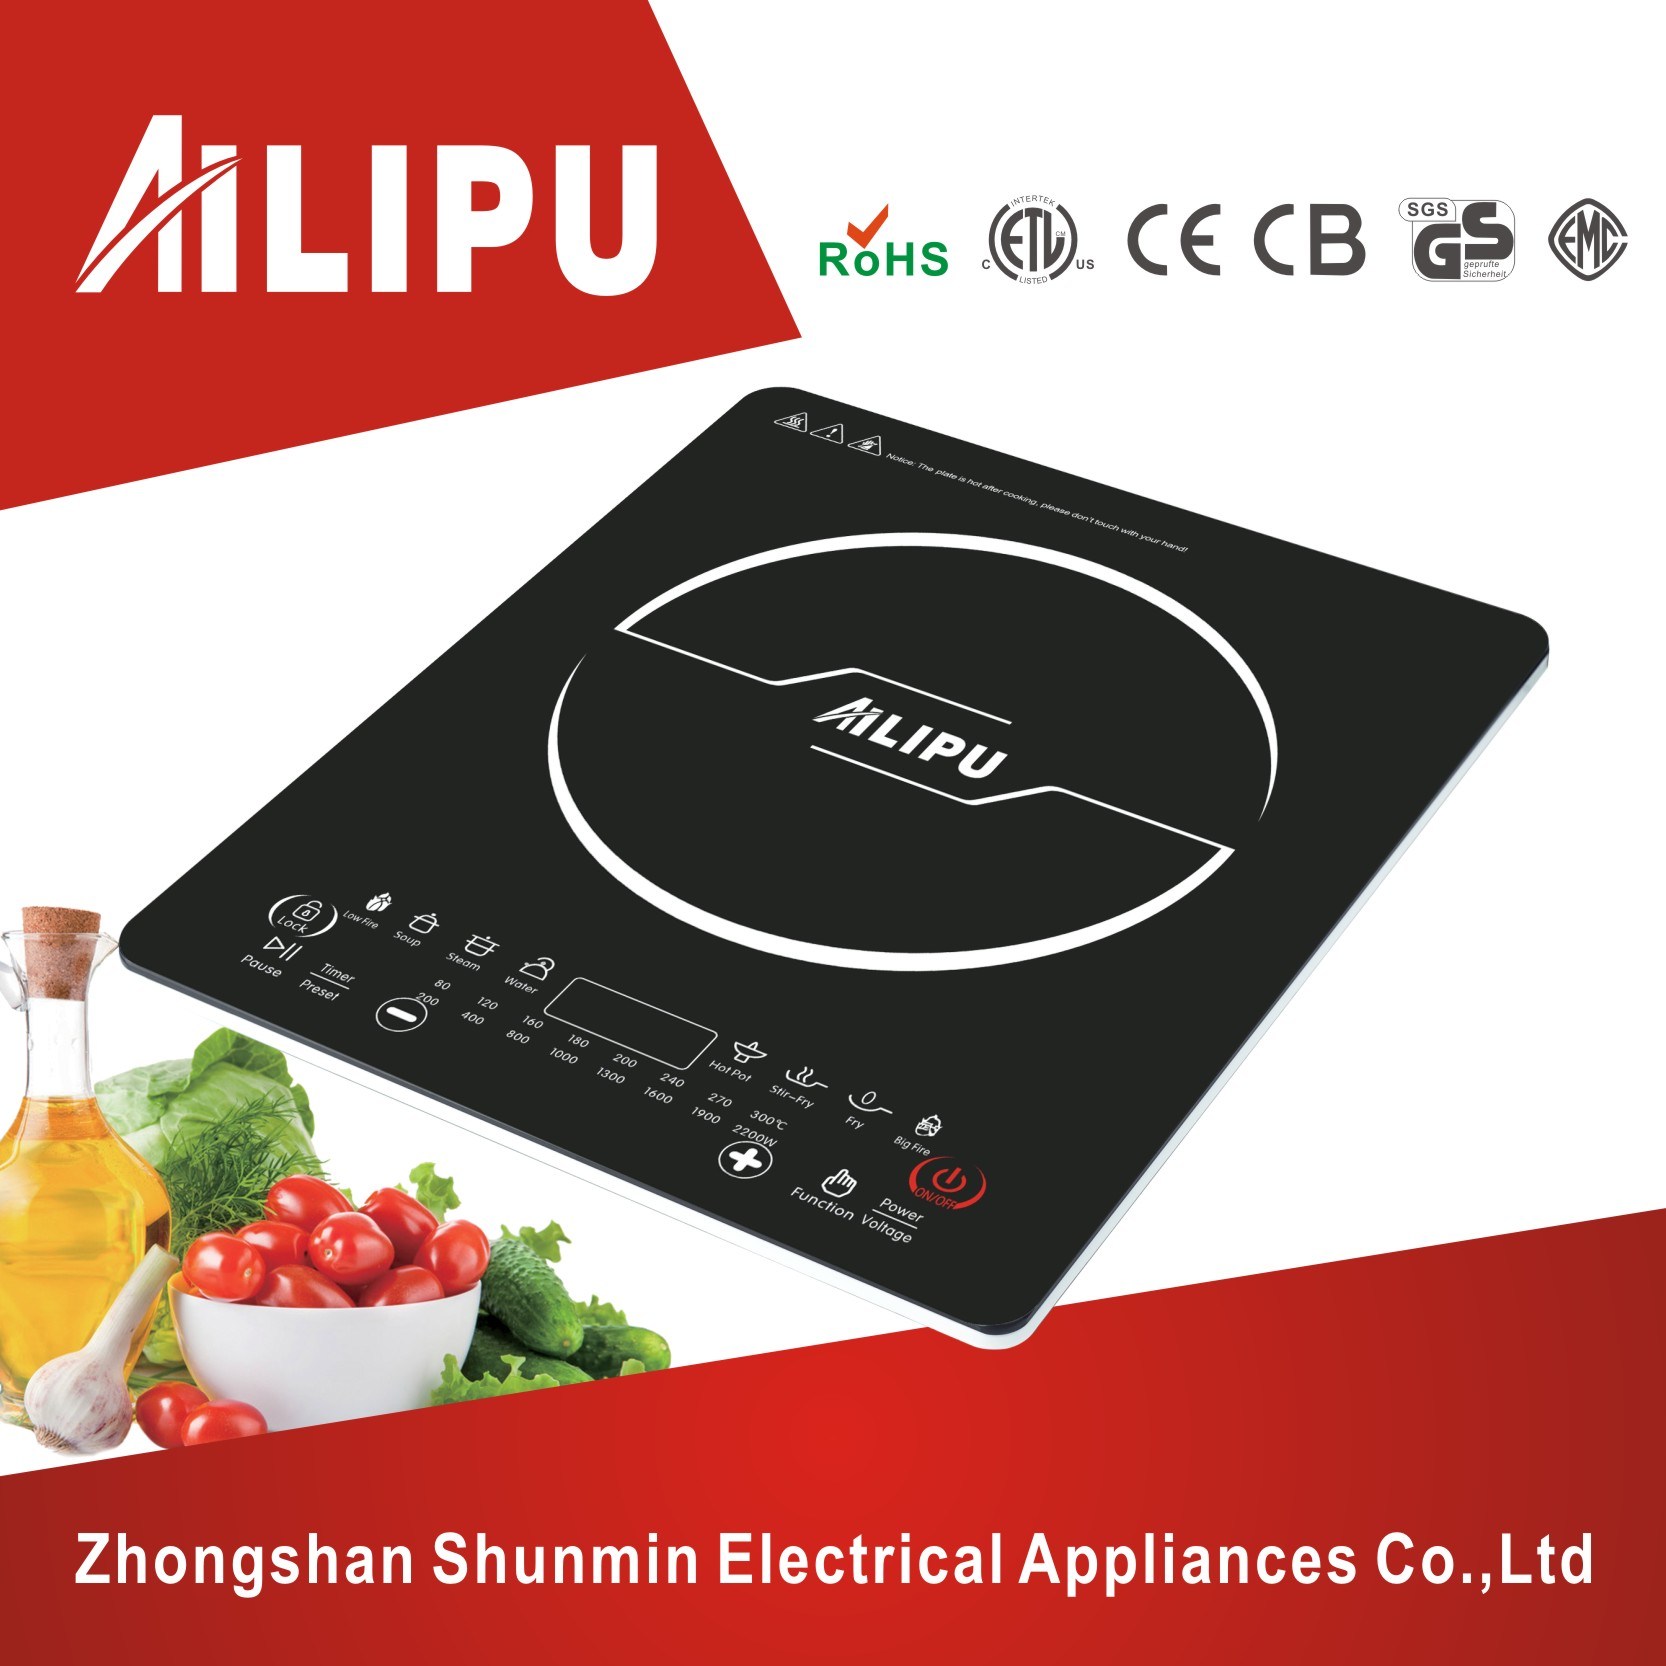 40mm Thickness Big Plate Touching Model Super Slim Induction Cooker